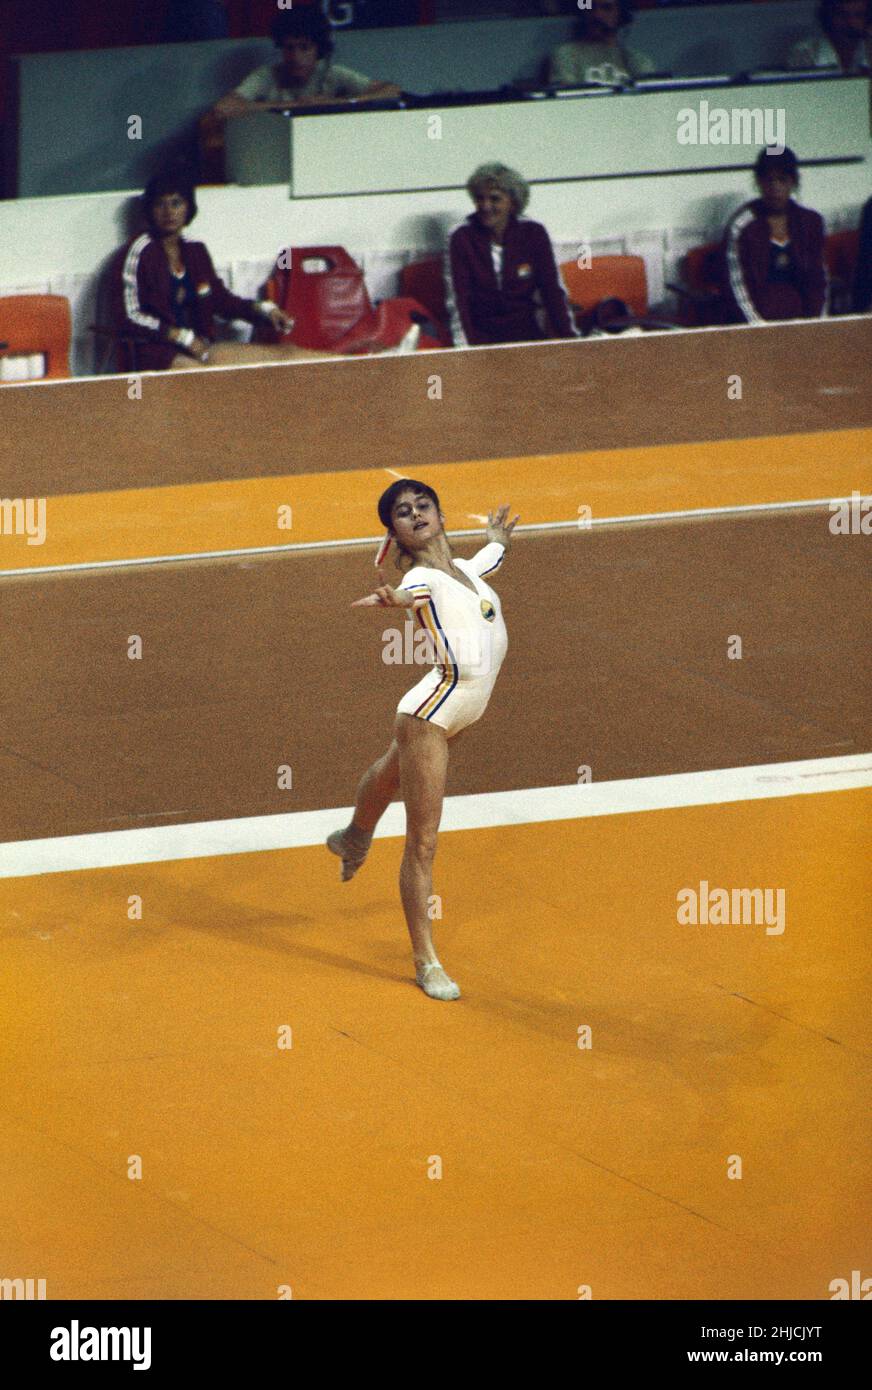 Romanian gymnast Nadia Comaneci (born 1961) at the 1976 Montreal Olympics. Comaneci won five Olympic gold medals in the sport between 1976 and 1980. Stock Photo